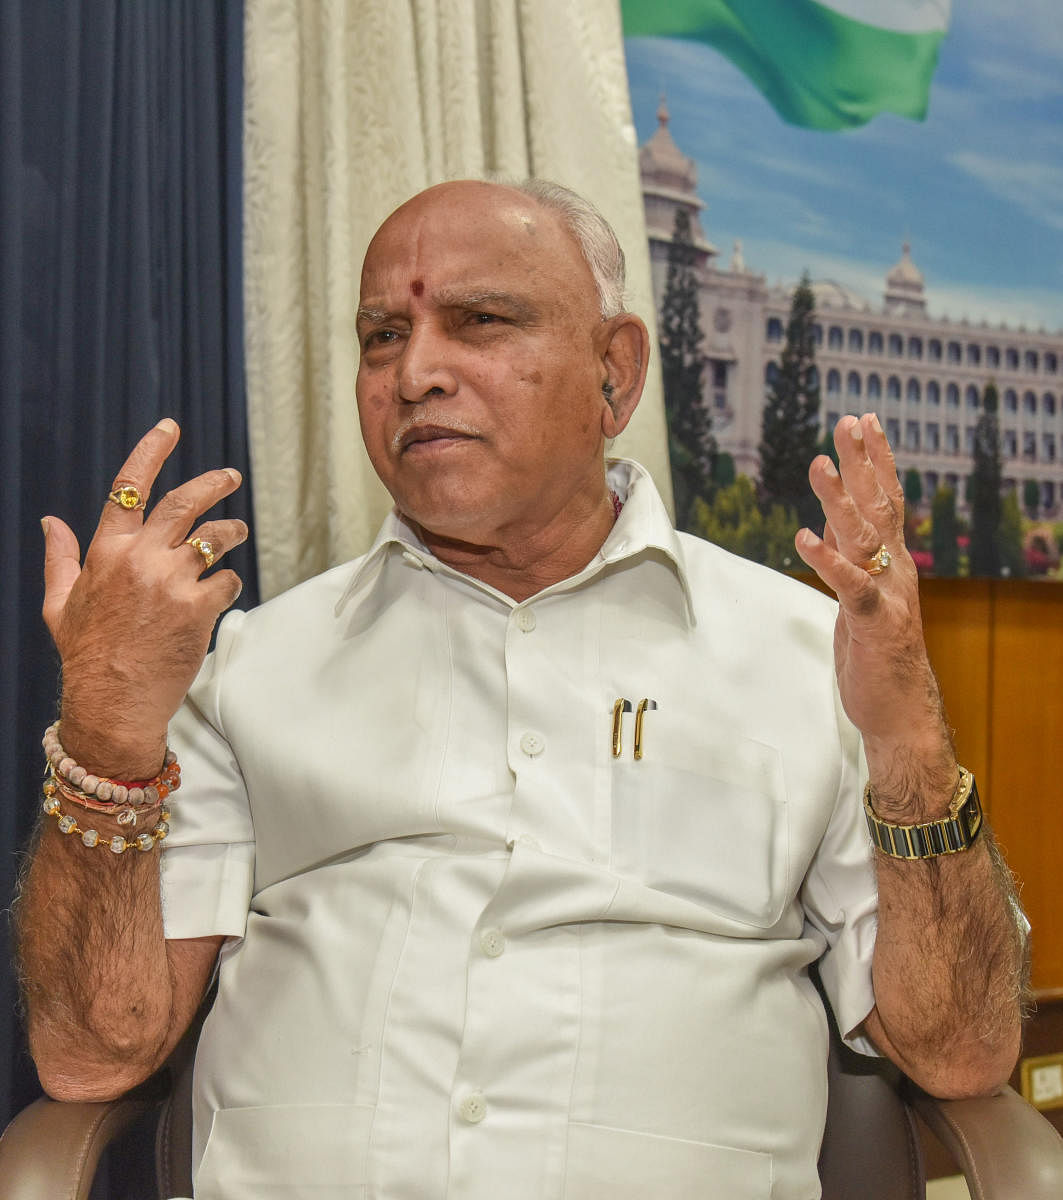 Chief minister B S Yediyurappa is scheduled to visit Delhi on January 14 and meet the party high command, following which the Cabinet expansion will be finalised, according to sources.